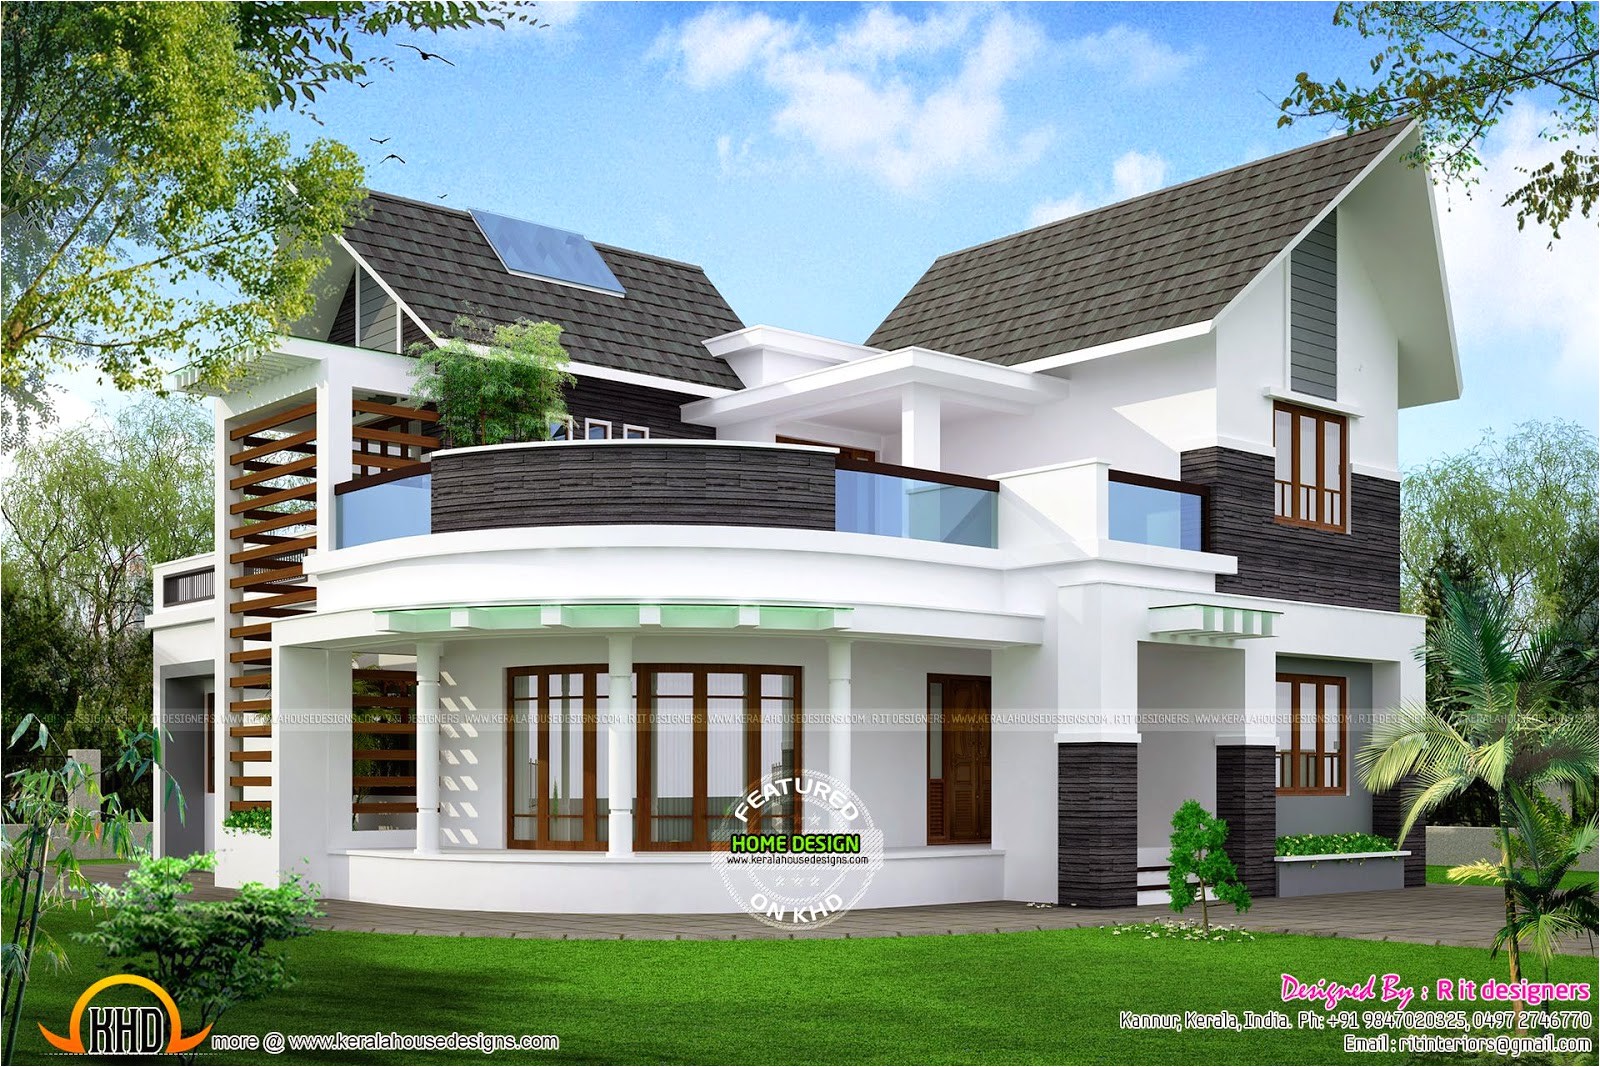 Cool Small Home Plans Beautiful Unique House Kerala Home Design and Floor Plans